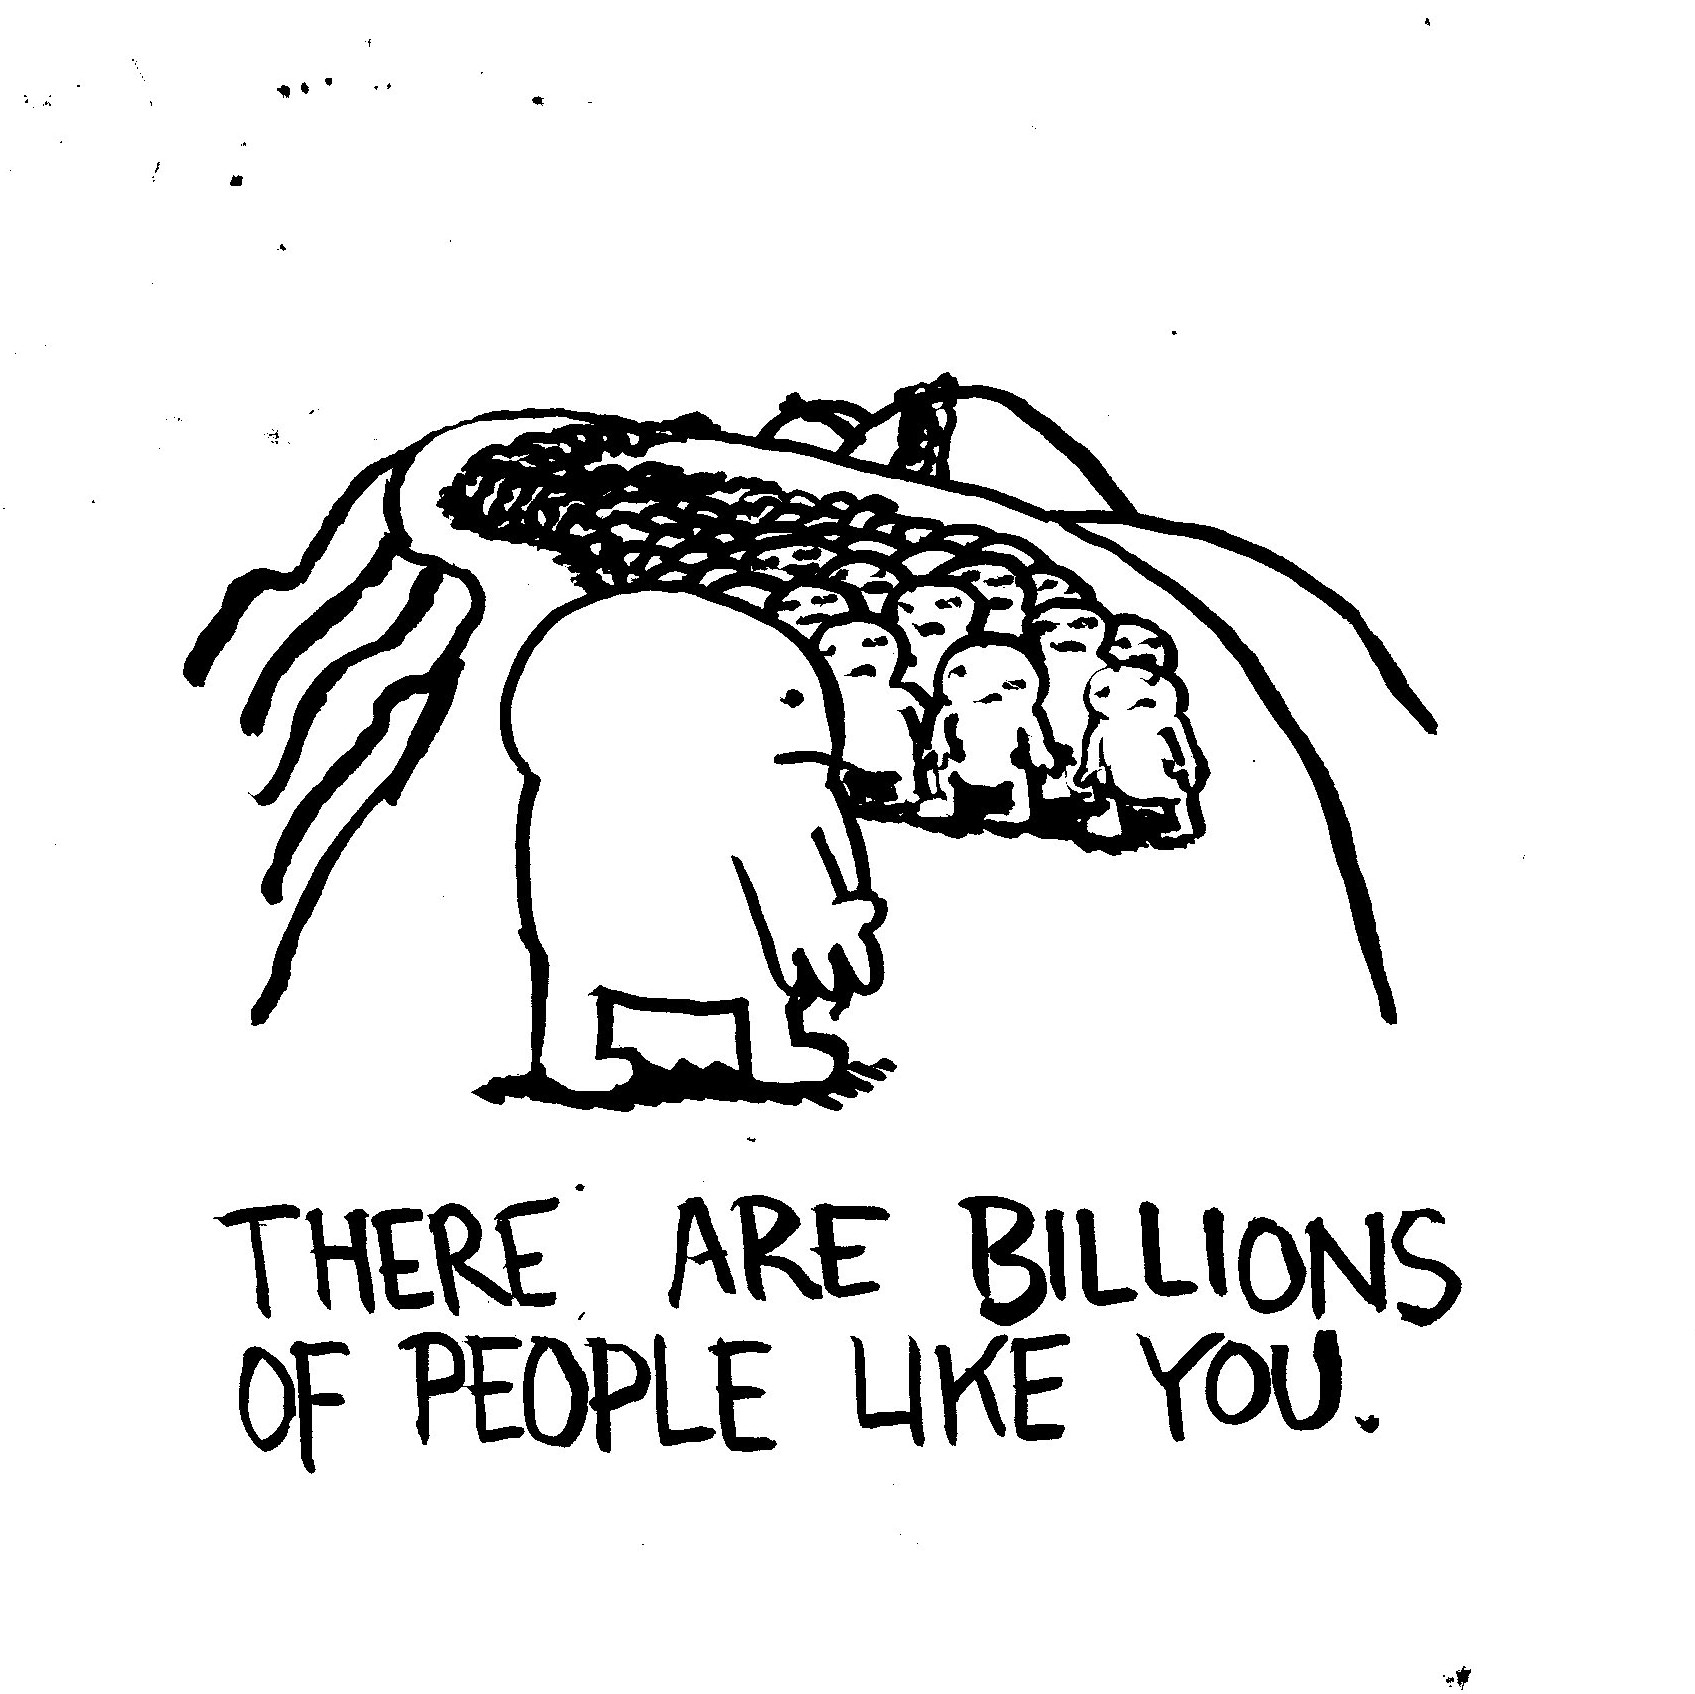 There are billions of people like you.